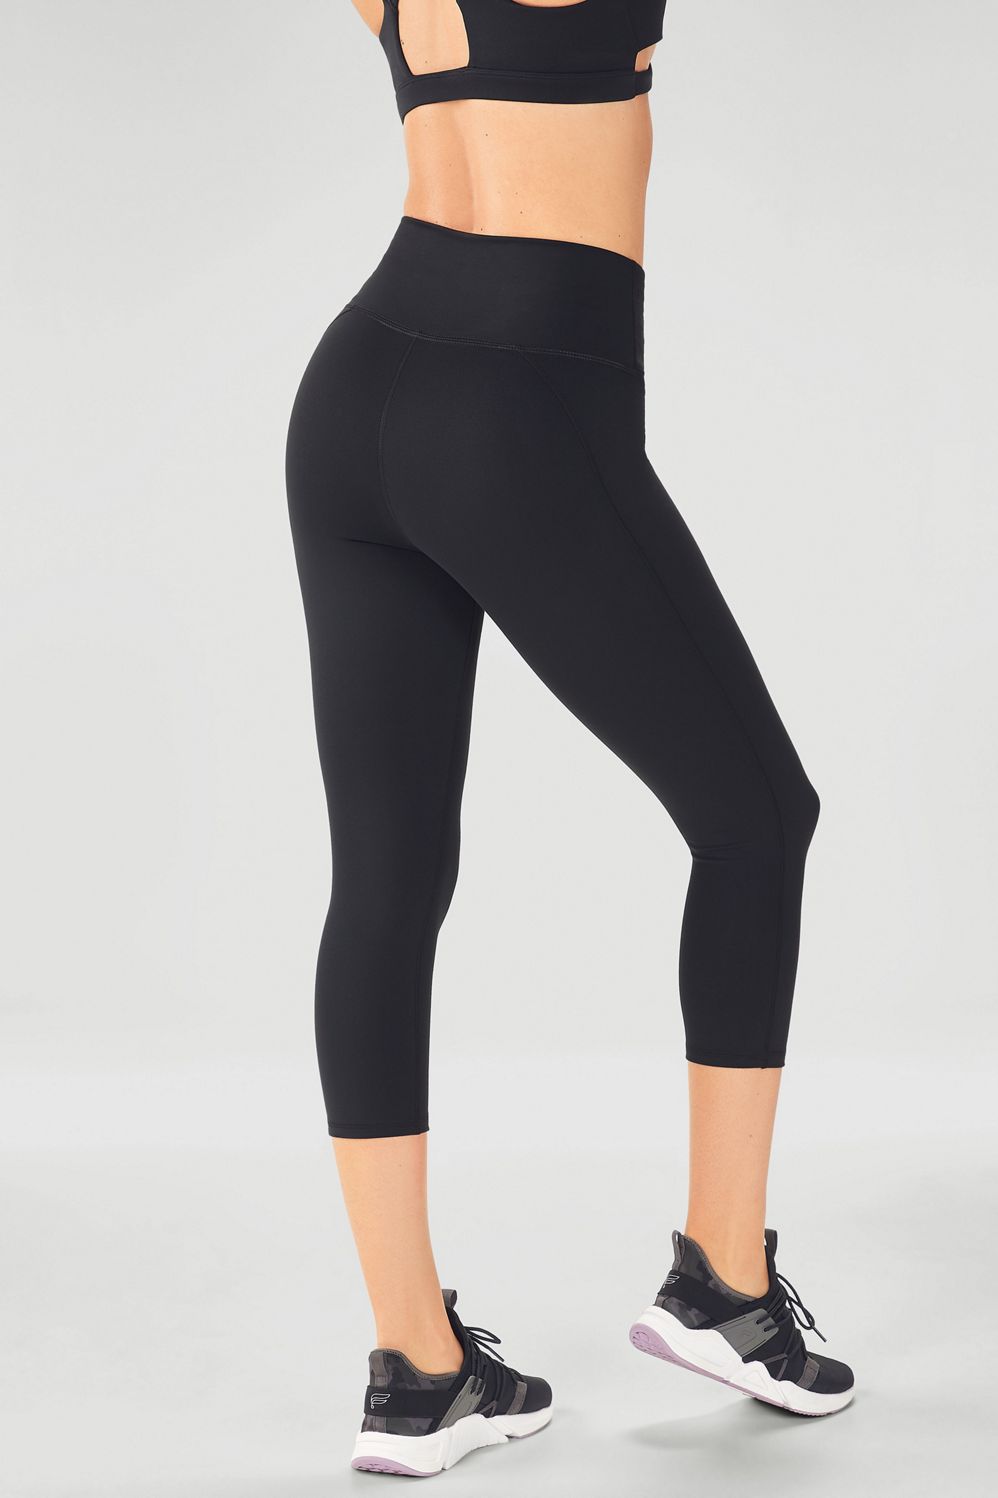 Fabletics Review: Does It Live Up To The Hype? - Thrifty Pineapple